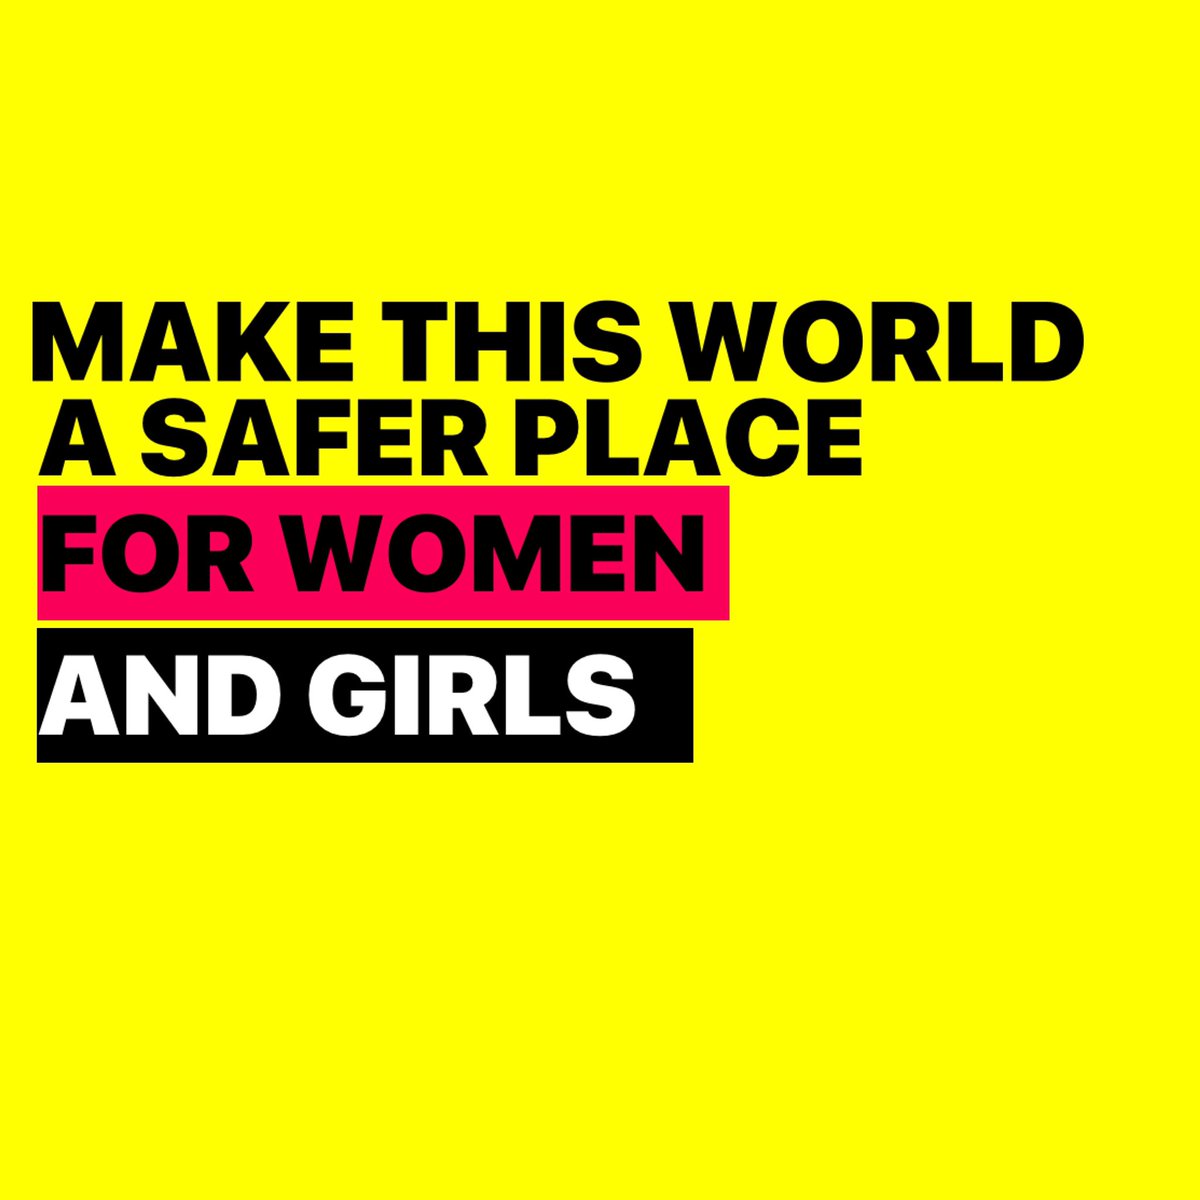 MEN WE NEED TO MAKE THIS WORLD A SAFER PLACE FOR WOMEN AND GIRLS!The last few months I have heard and read things that have been really concerning regarding women’s and girls safety.A thread >>>